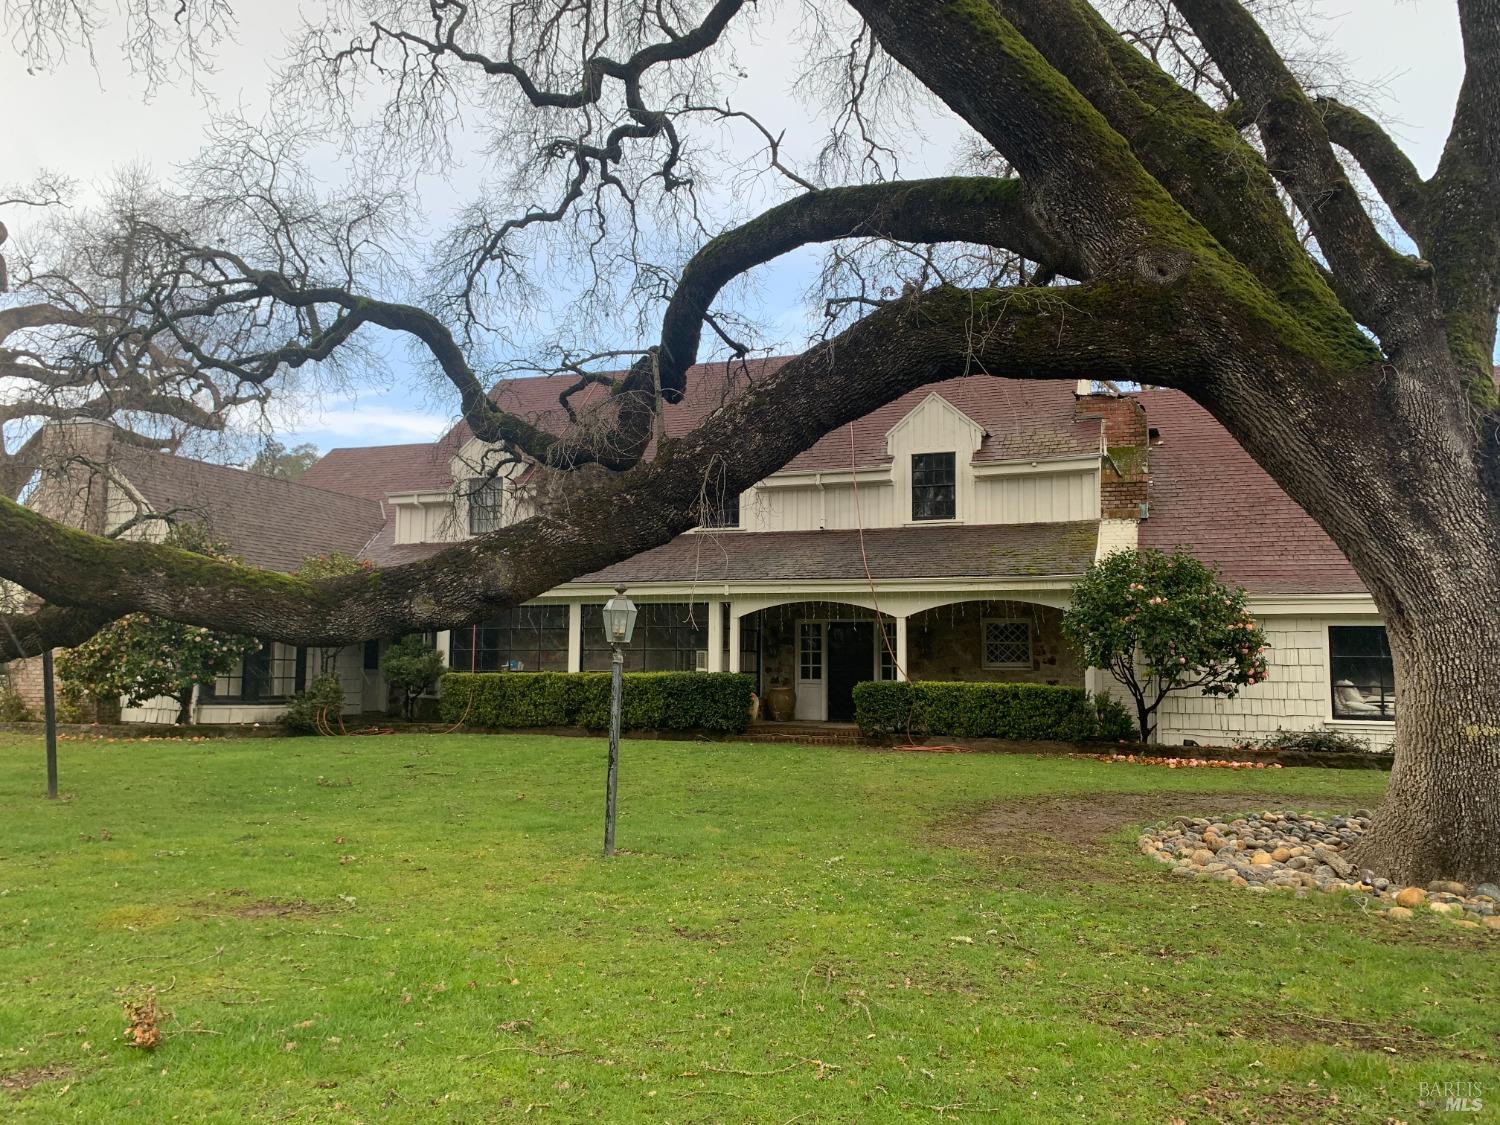 Photo of 4110 Dry Creek Rd in Napa, CA